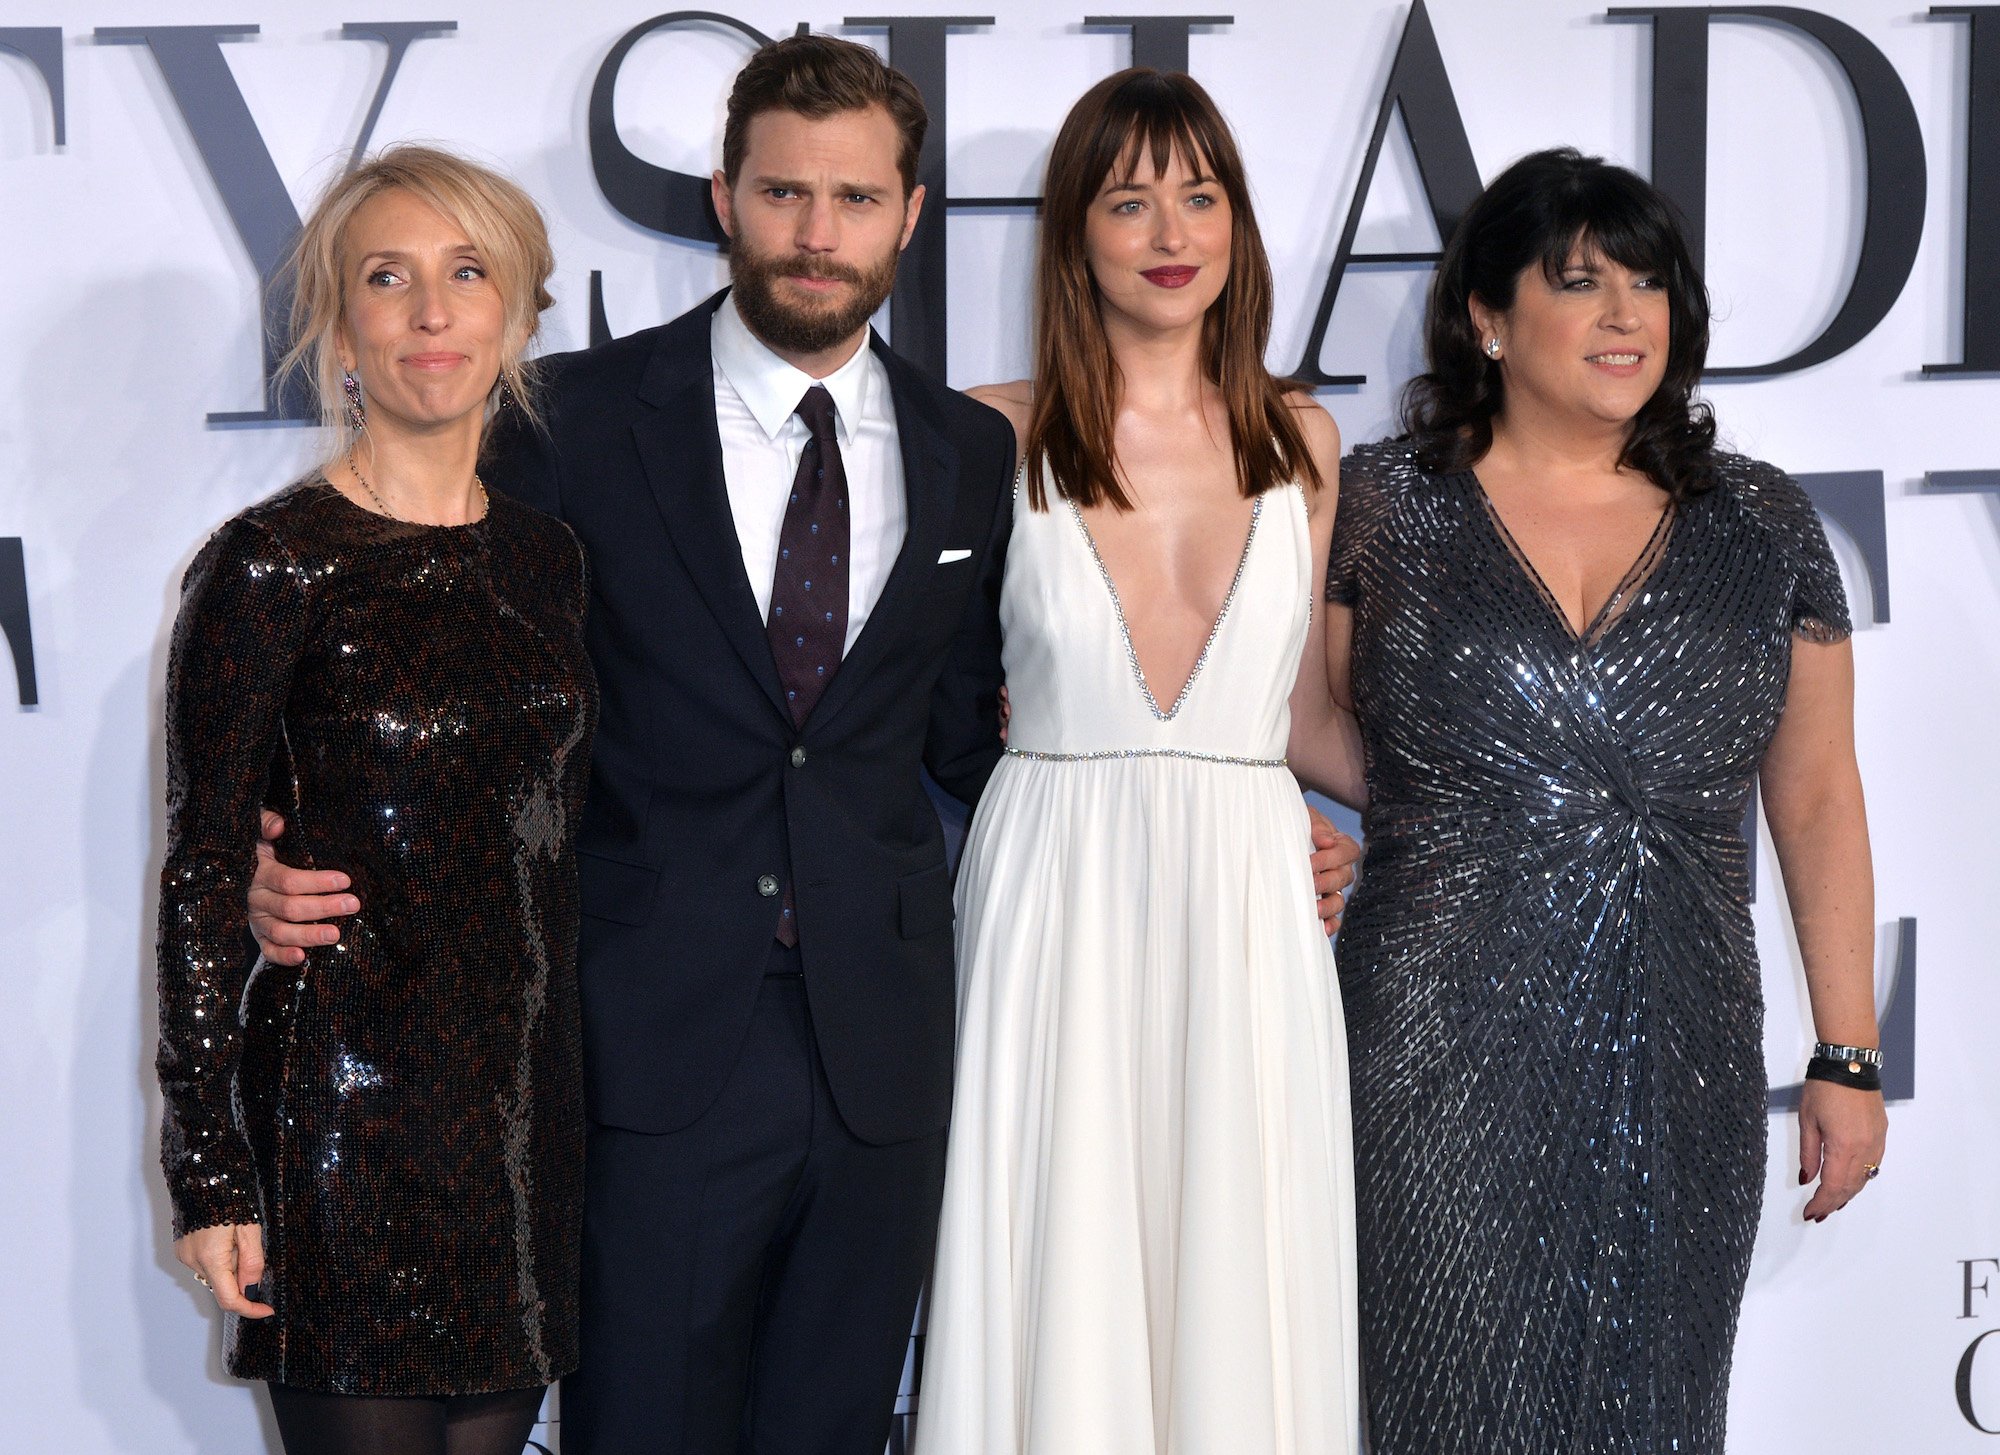 The Fifty Shades Of Grey Director Said It Was Incredibly Painful To Work With Author E L James